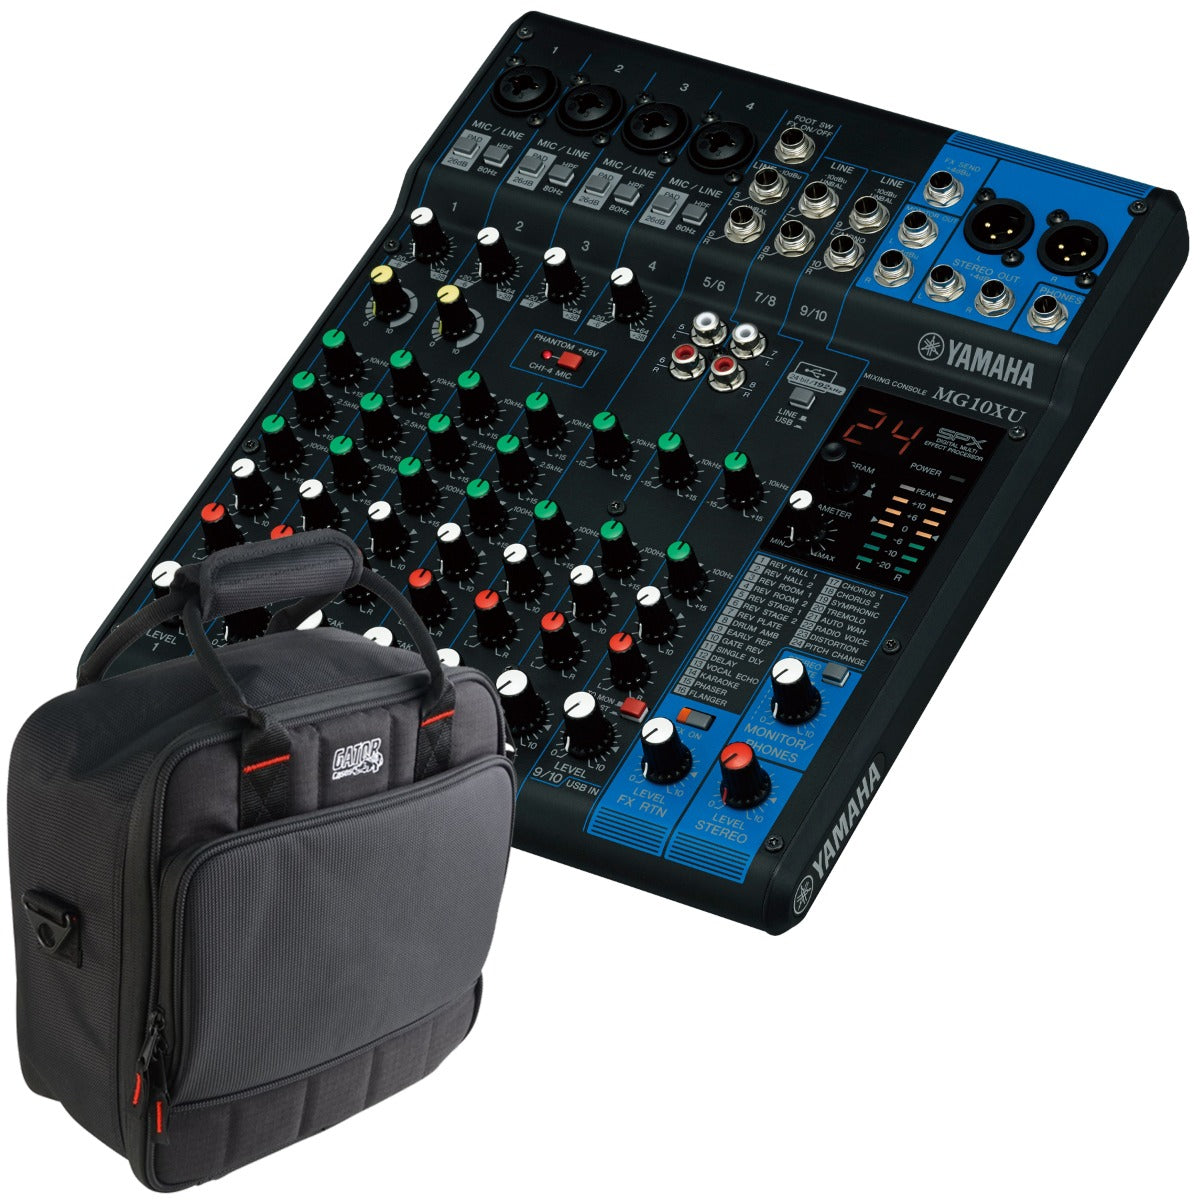 Collage of the components in the Yamaha MG10XU 10-Channel Compact Stereo Mixer/USB Interface CARRY BAG KIT bundle